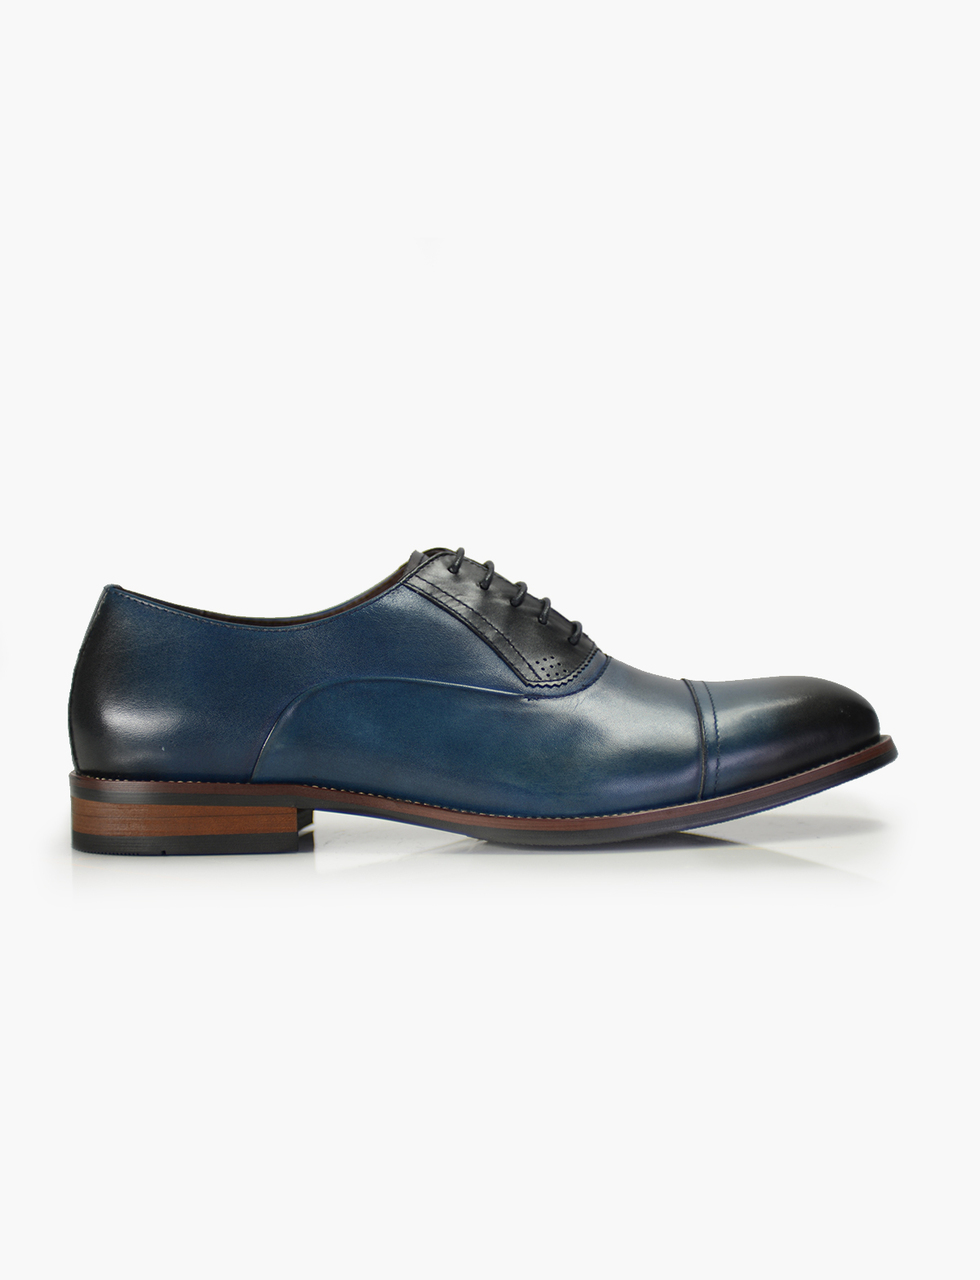 Corsica Blue Oxford Shoes - Formal Tailor